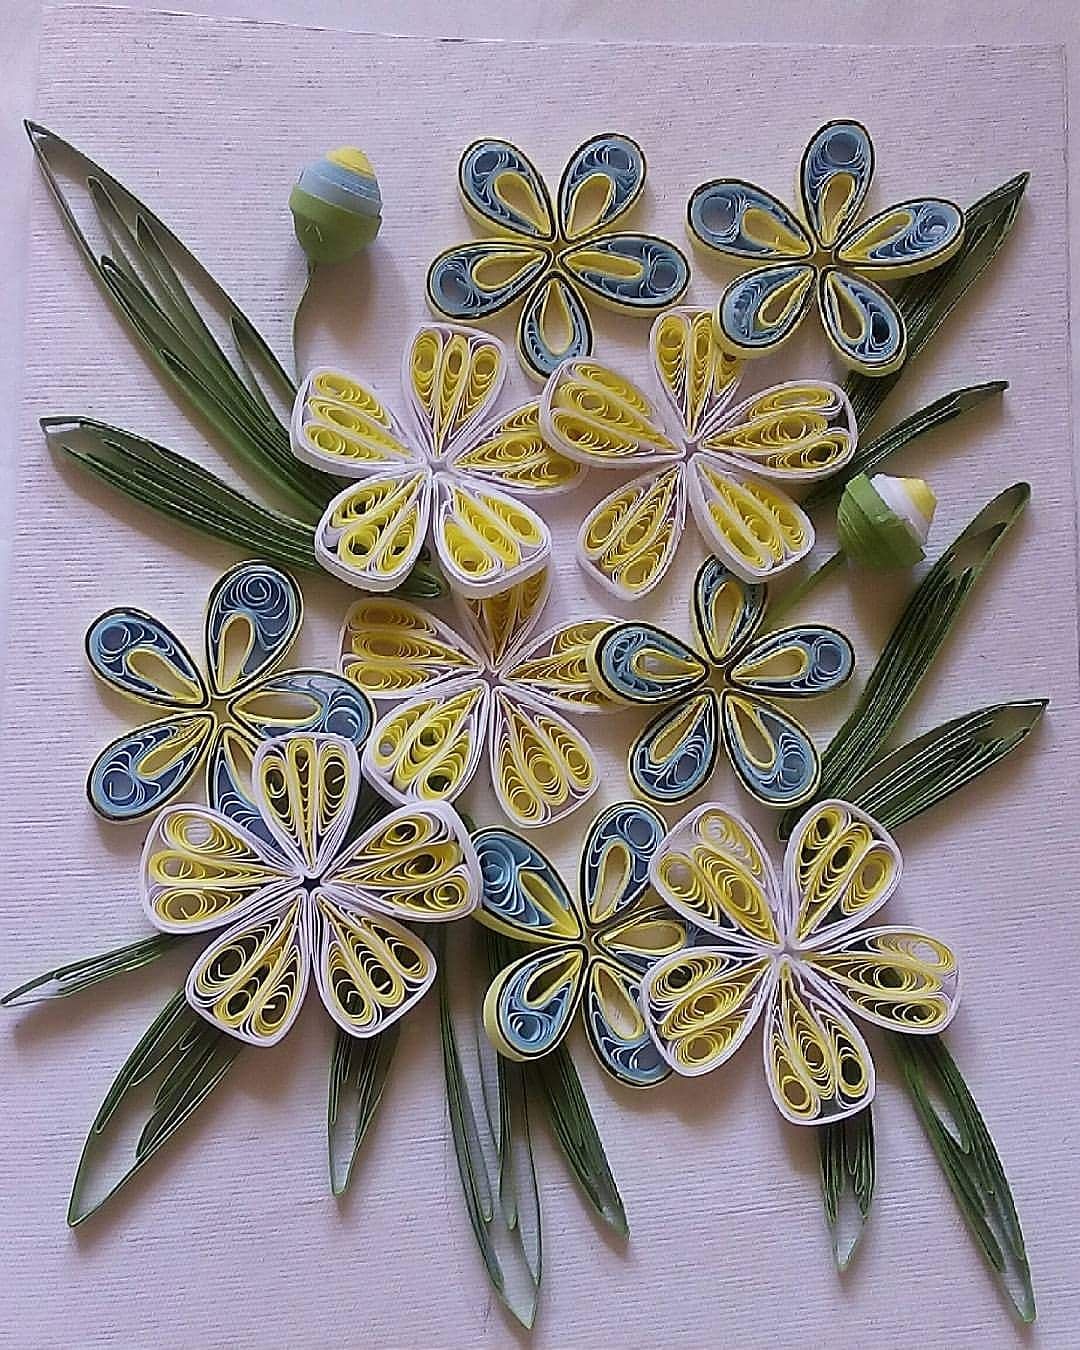 Apoorva uses handmade quilling paper to make intricate designs. 